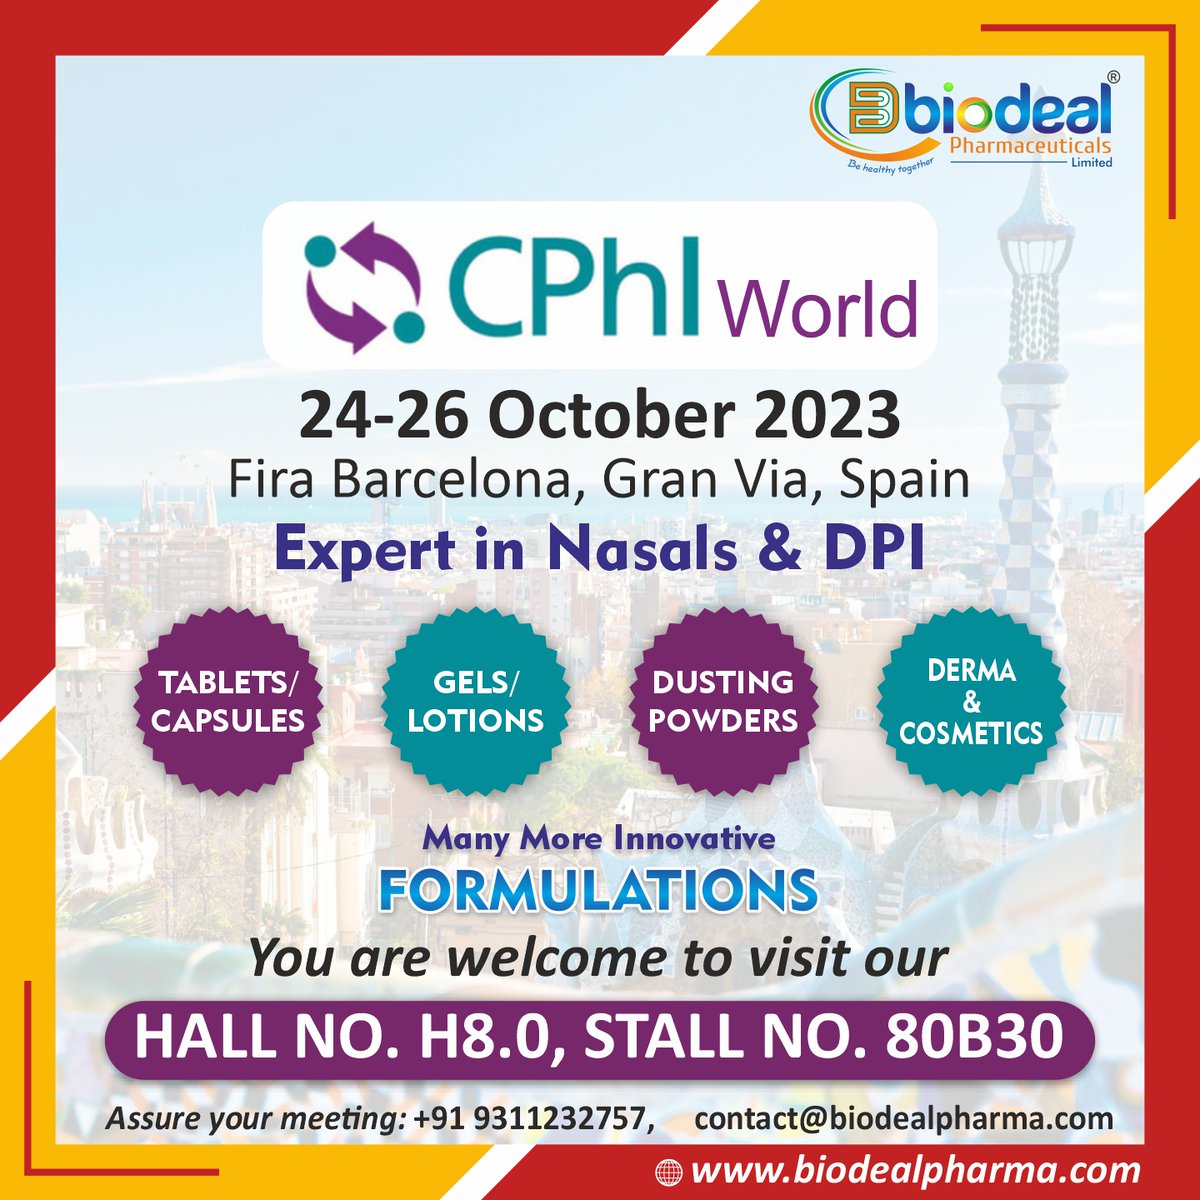 Biodeal Pharmaceuticals Limited is one of the verified and renowned manufactures will exhibit in Global Platform of CPHI World Wide which is going to held on 24-26 October 2023 Fira Barcelona, Gran Via, Spain. #cphi #cphiworldwide #cphibarcelona #PharmaExpo #exibition #export